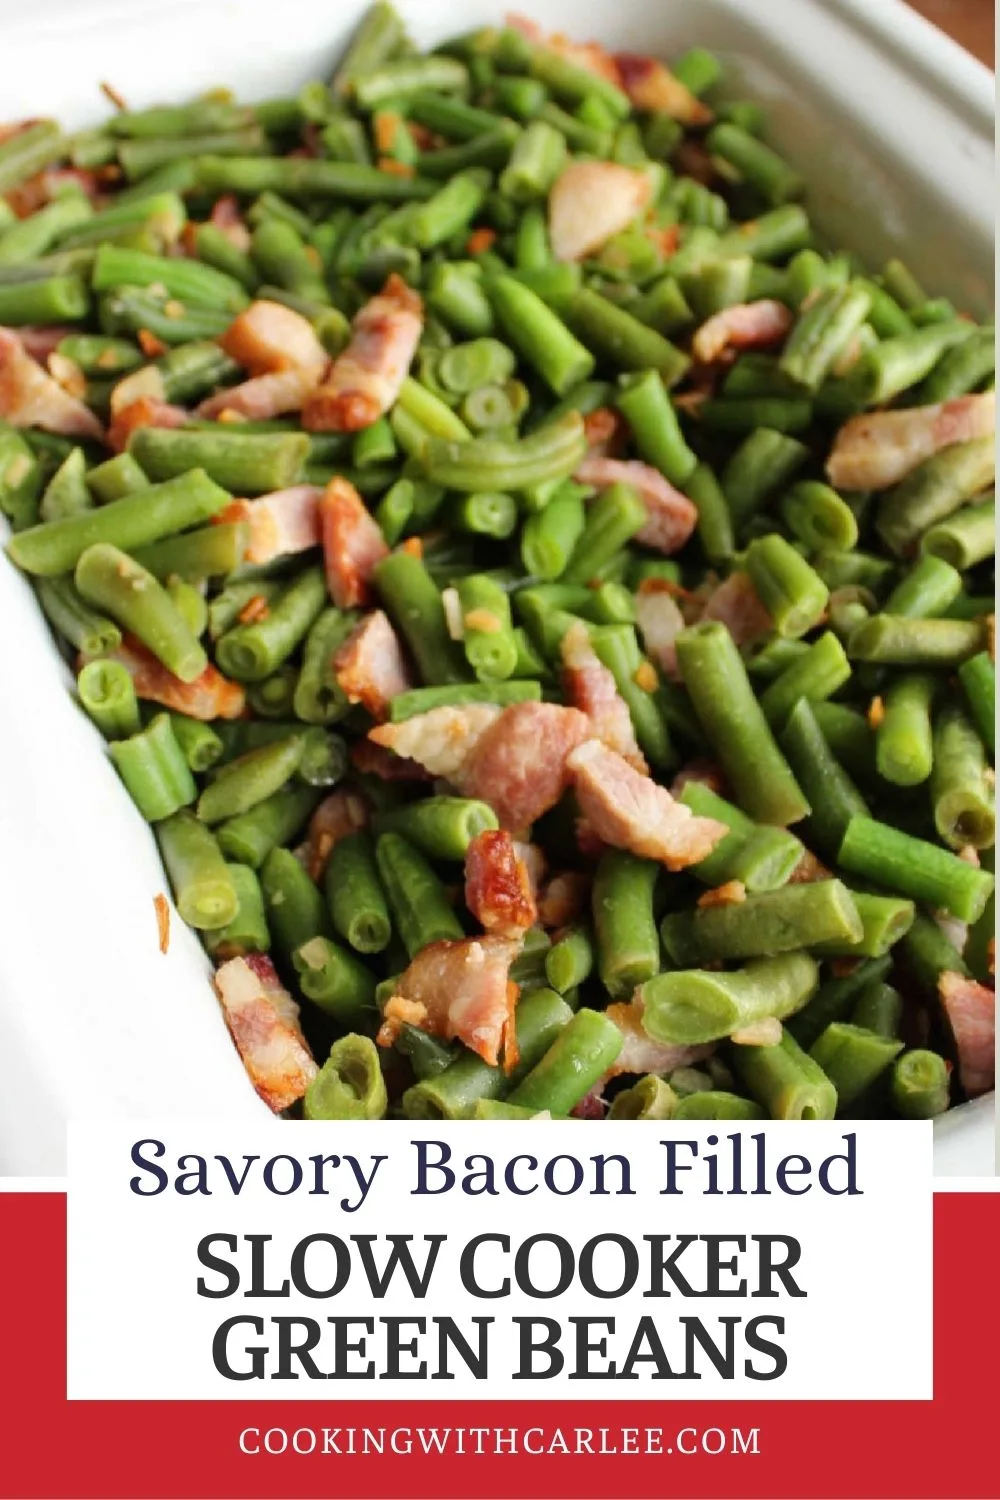 Savory slow cooker green beans are a flavorful side dish for any meal. Just toss the ingredients in a slow cooker several hours before the meal and they'll be ready when you are.